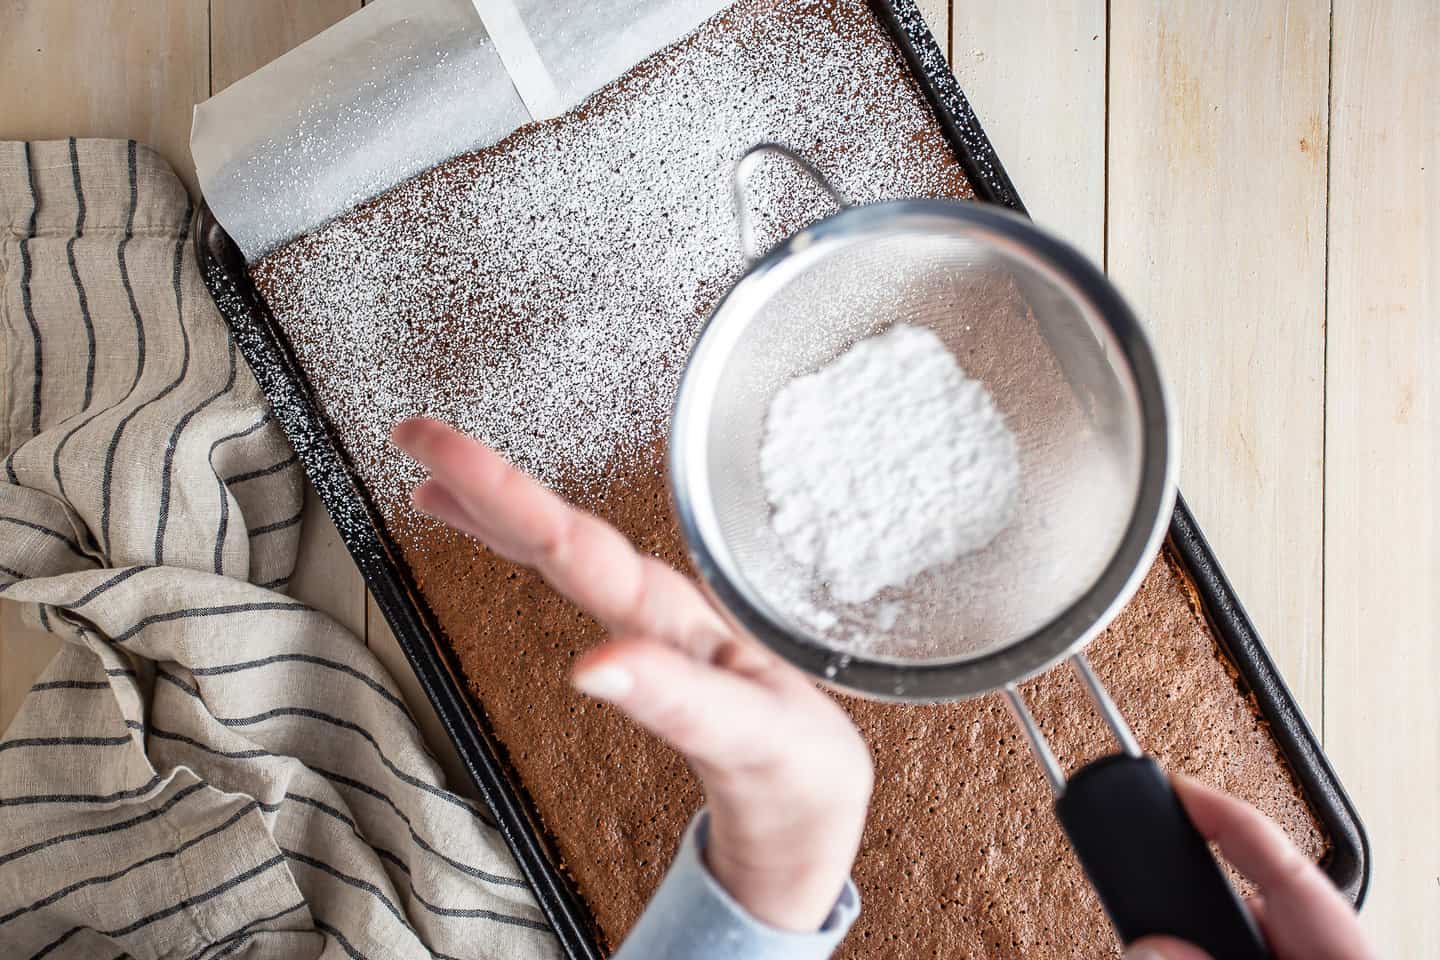 Dusting Swiss roll cake with powdered sugar to prevent sticking.